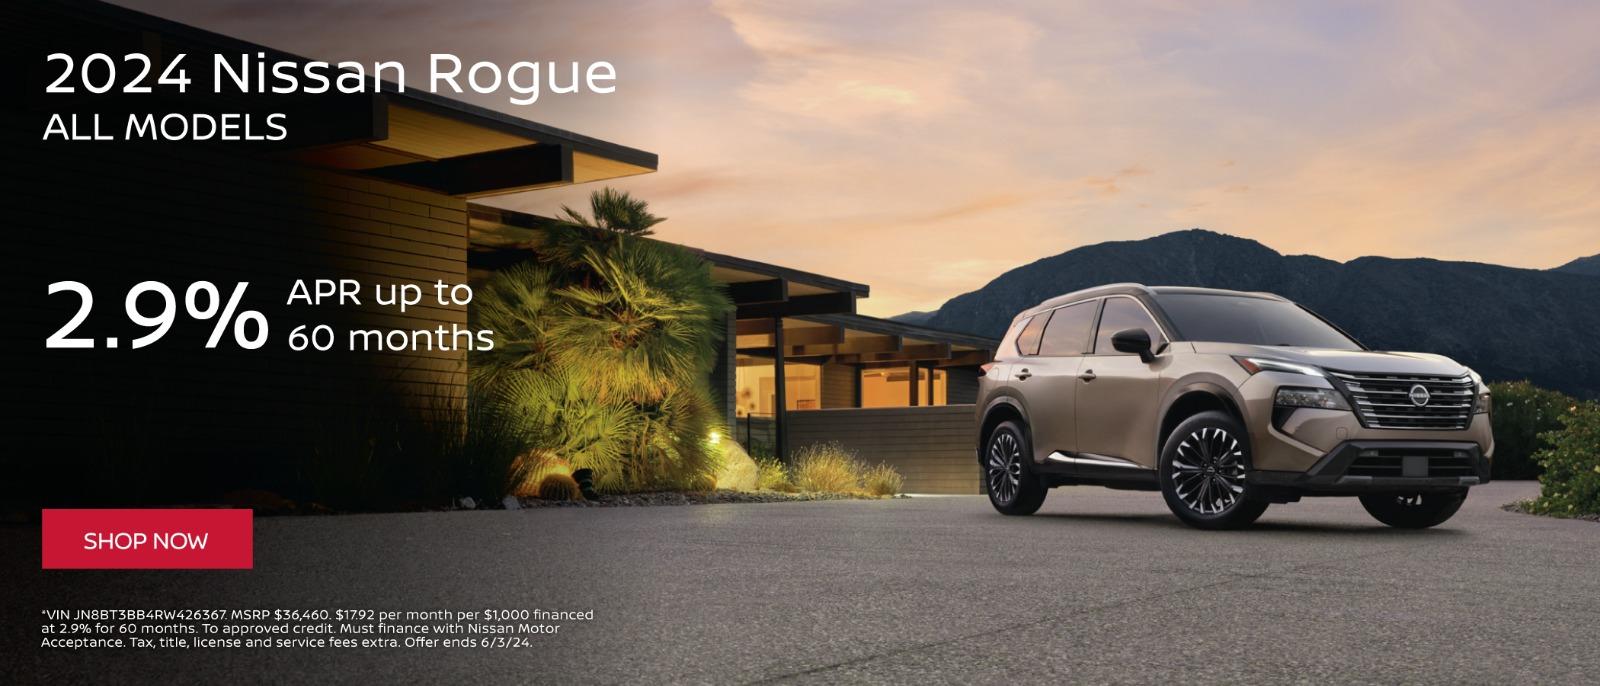 2024 Nissan Rogue 2.9% Apr up to 60 Months